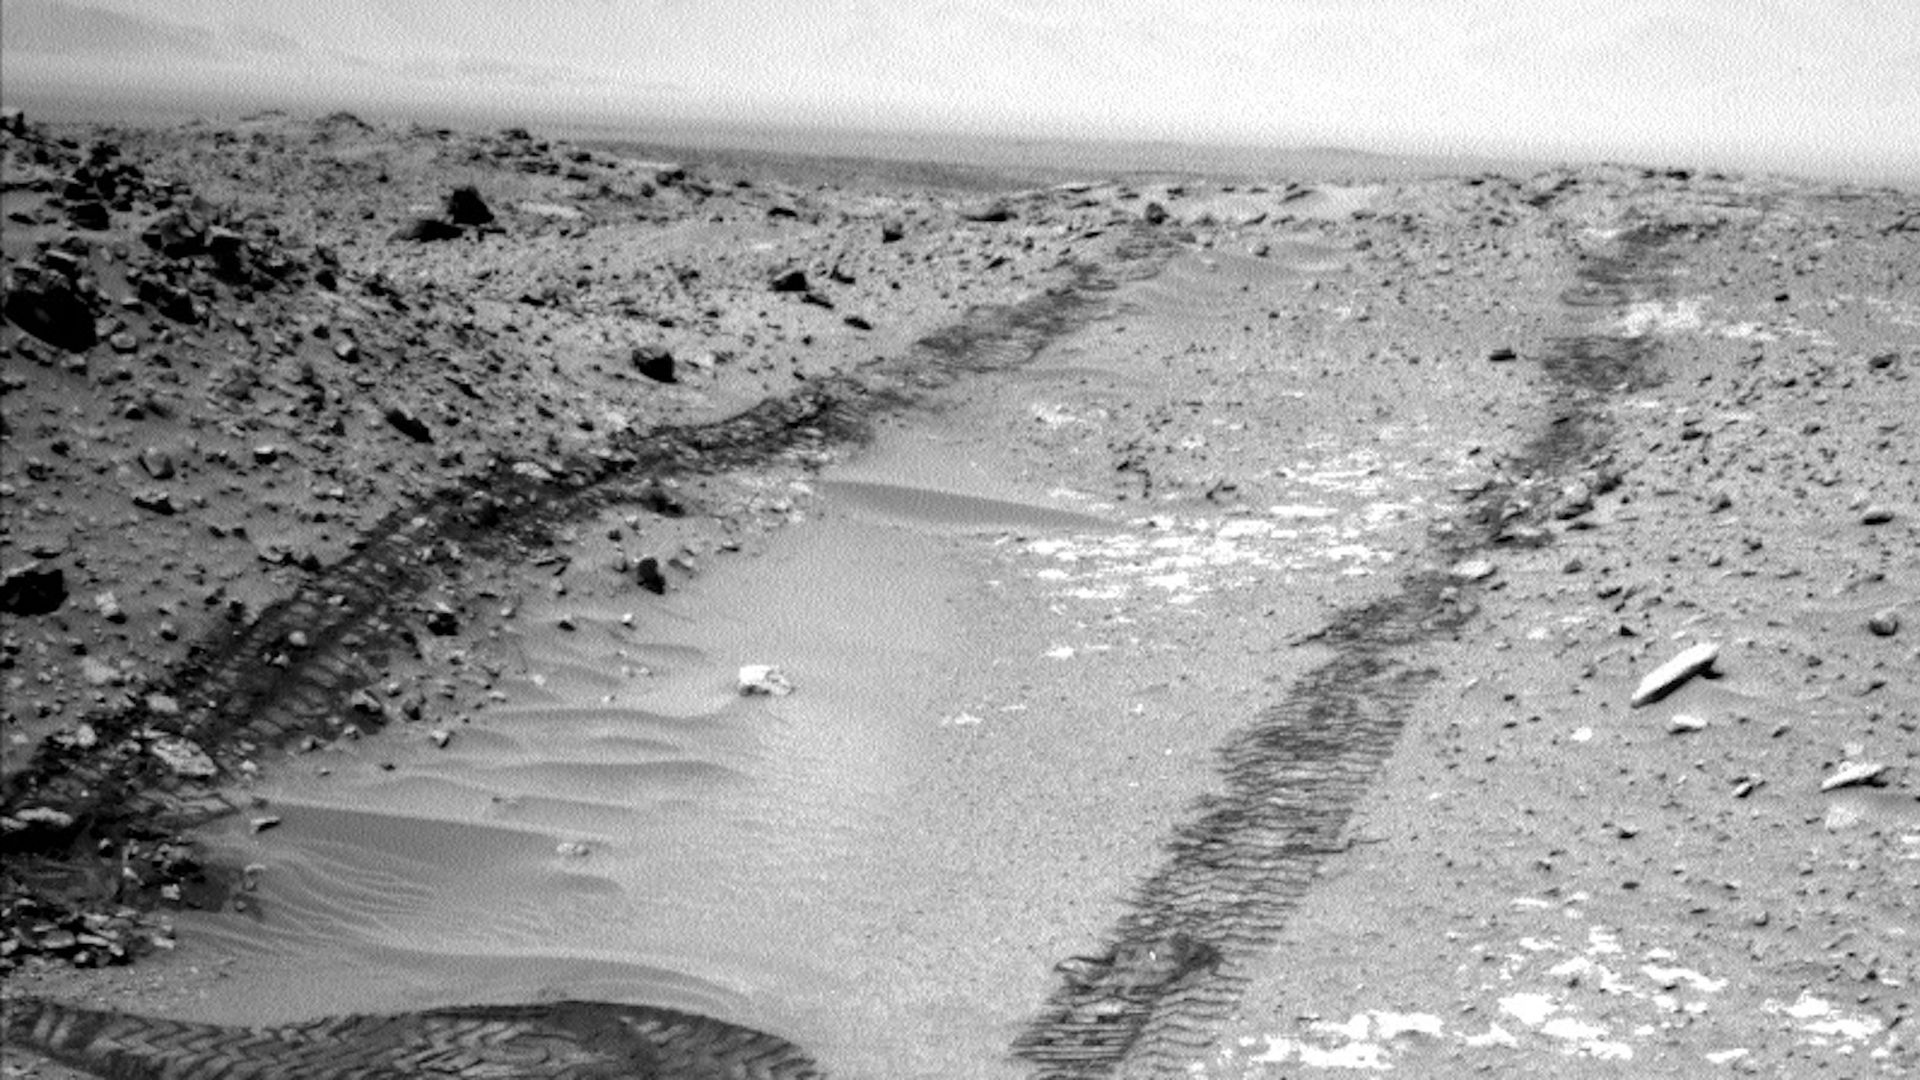 Tracks from the Mars Curiosity rover in black and white.